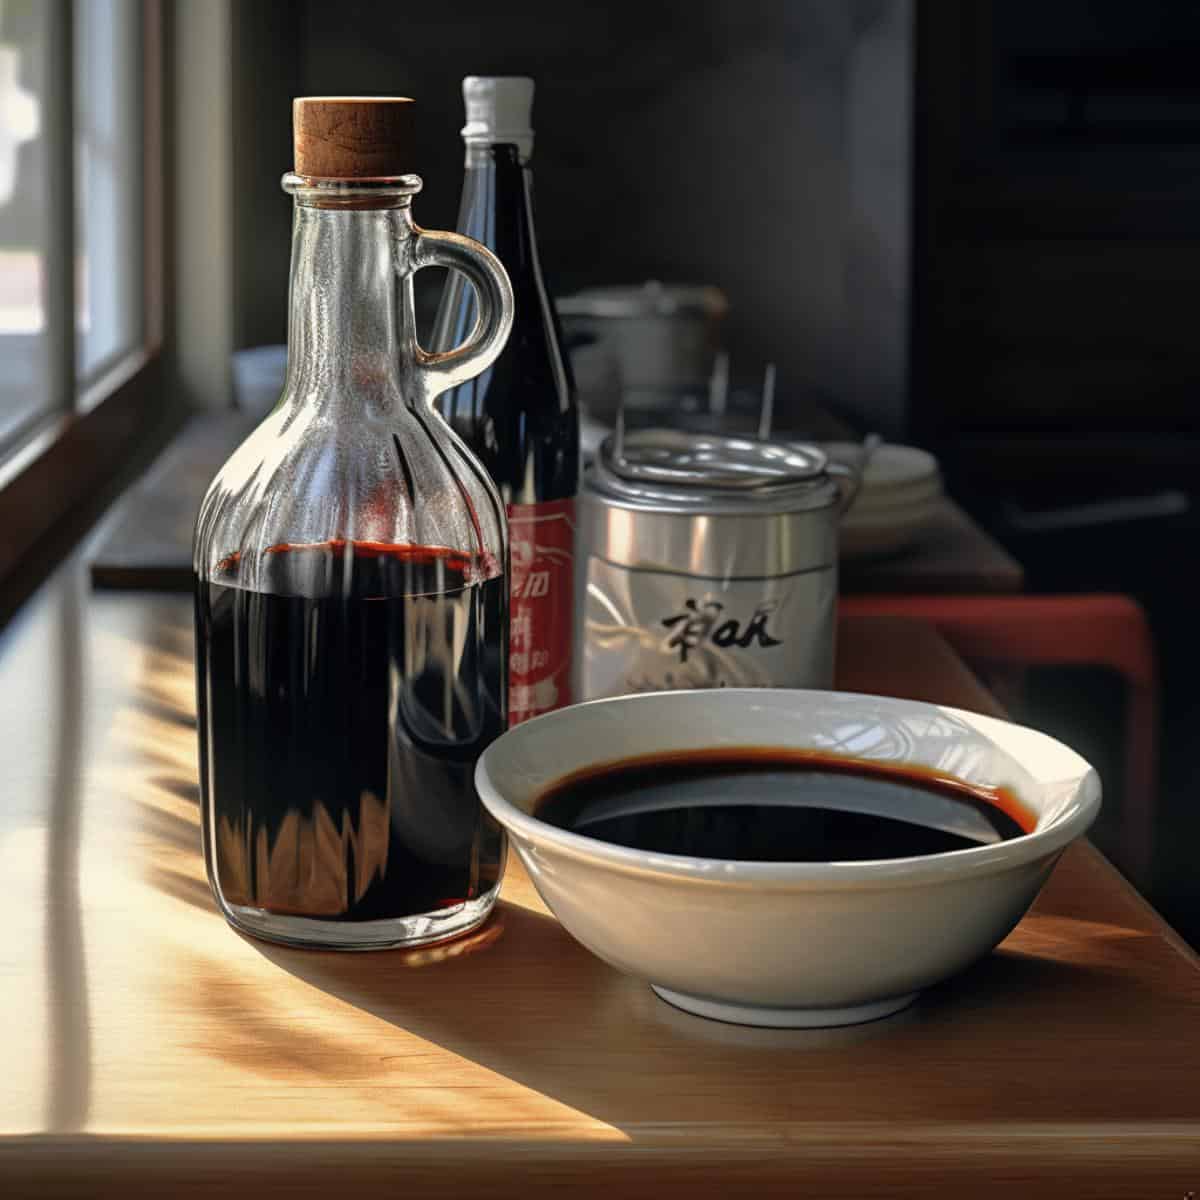 Soy Sauce on a kitchen counter